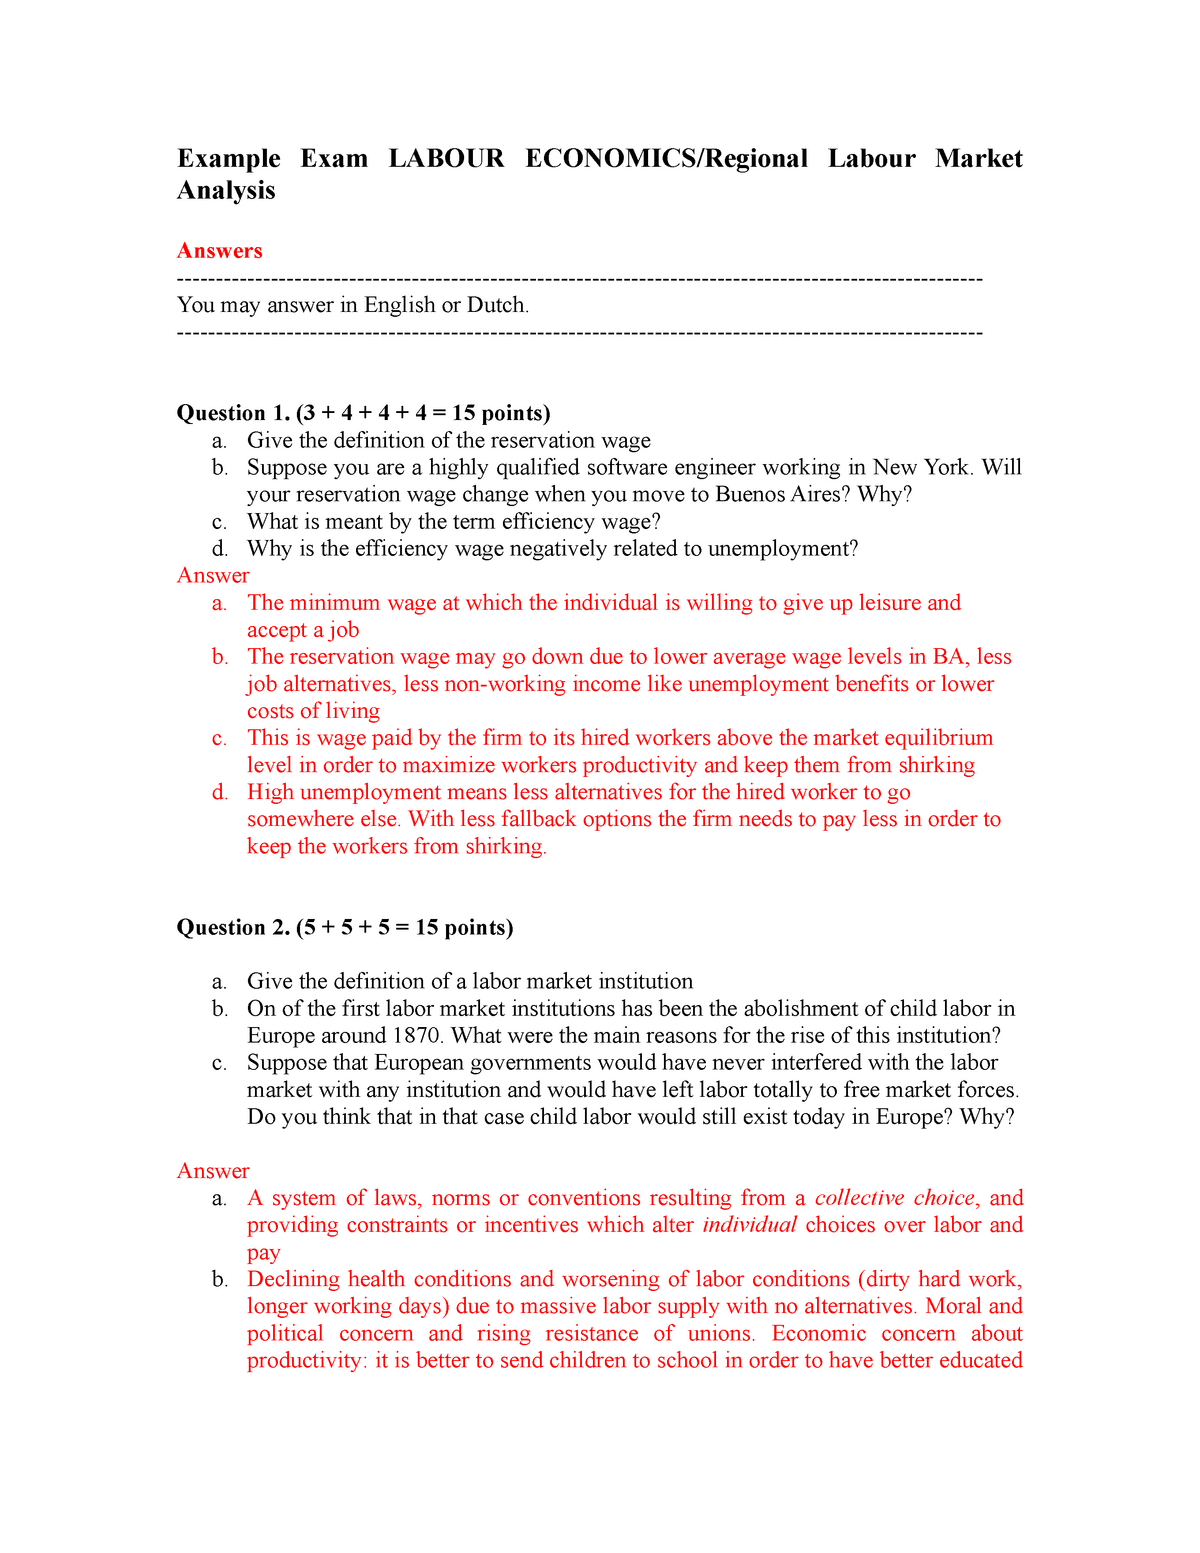 Practice exam 2015, Questions and answers Example Exam LABOUR ECONOMICS StudeerSnel